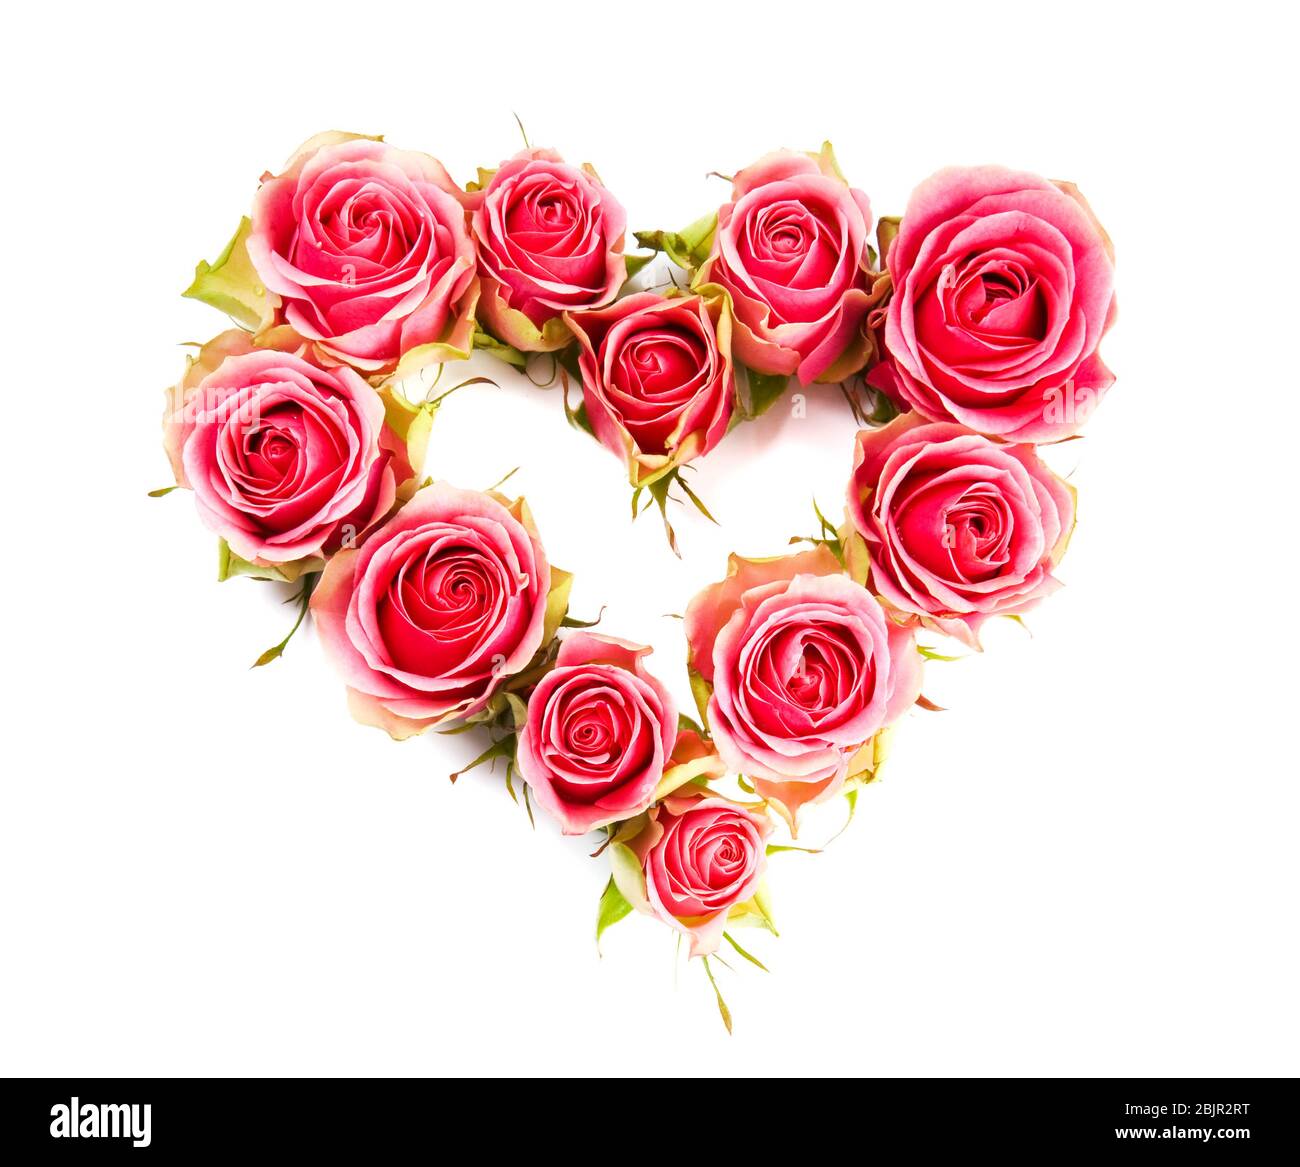 Love rose Cut Out Stock Images & Pictures - Alamy